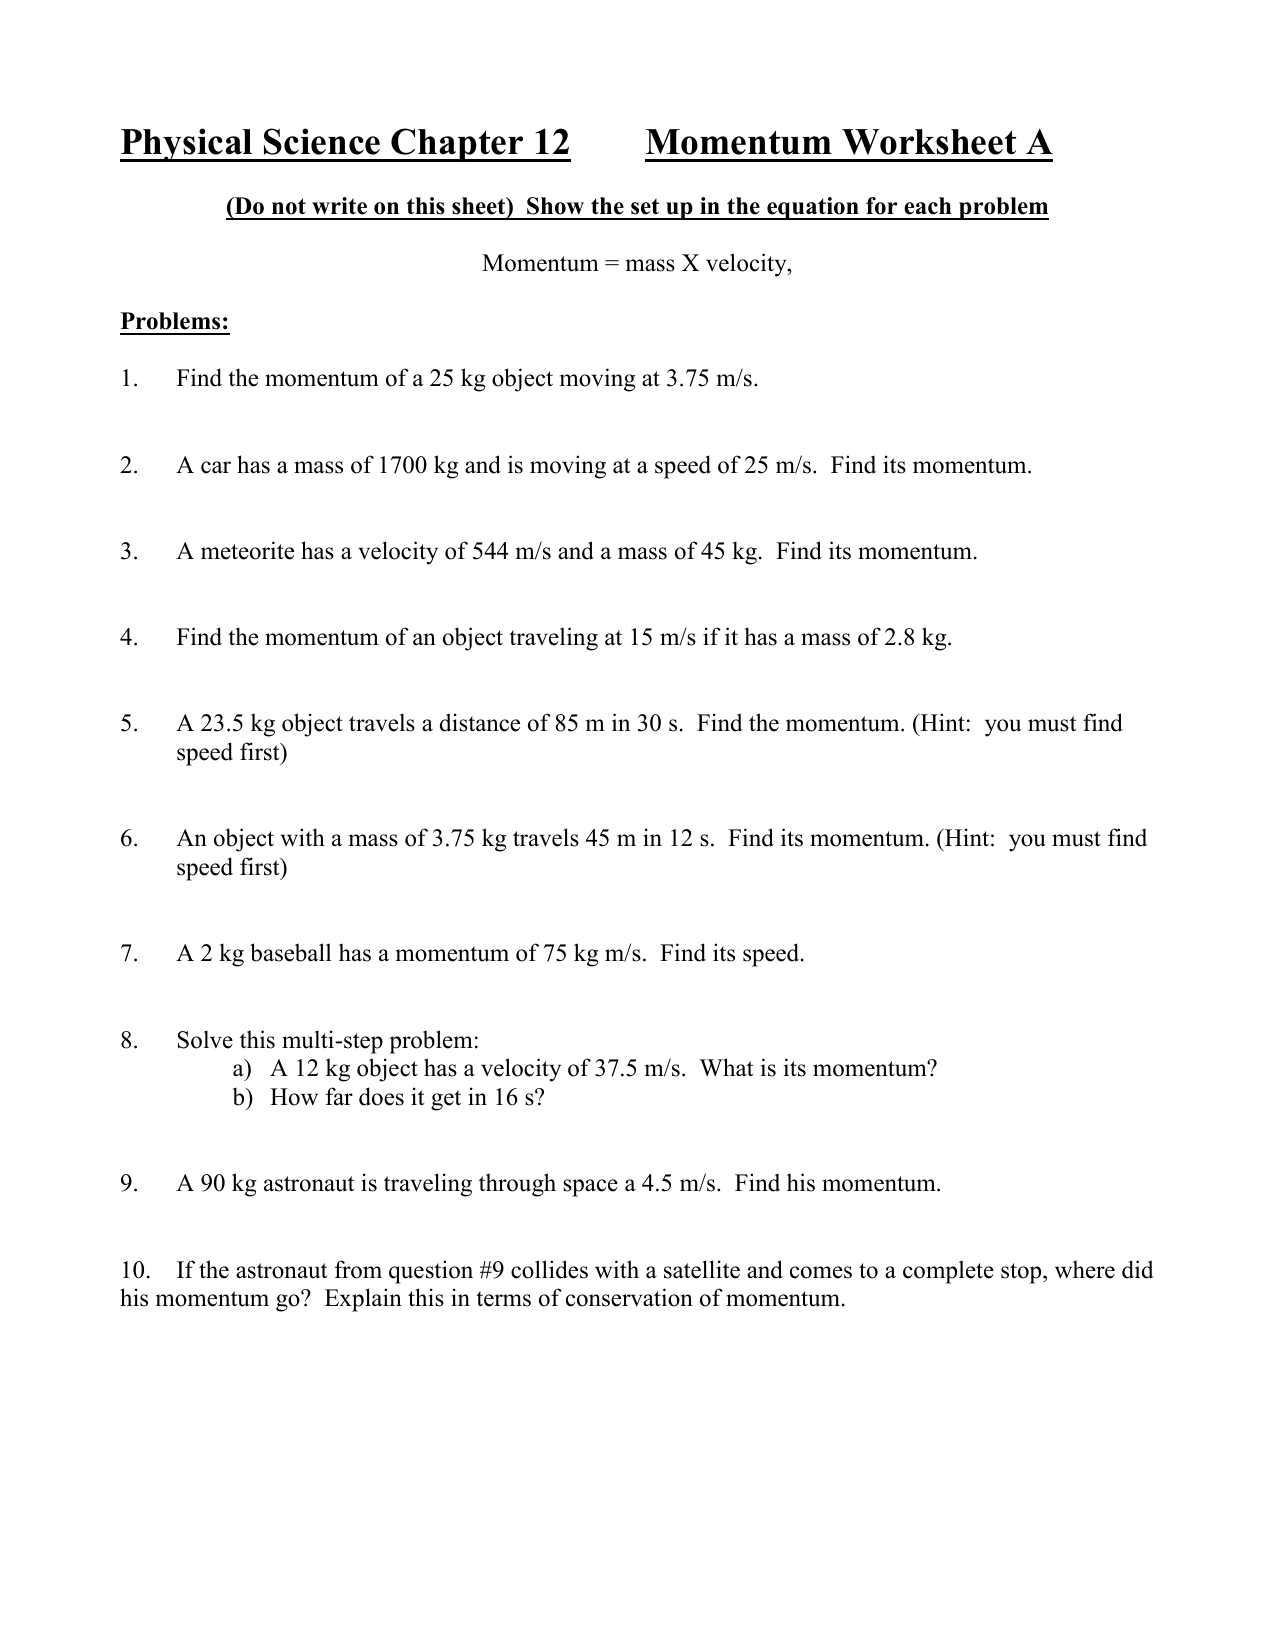 Momentum Worksheet-A ch22 (22) With Momentum Worksheet Answer Key